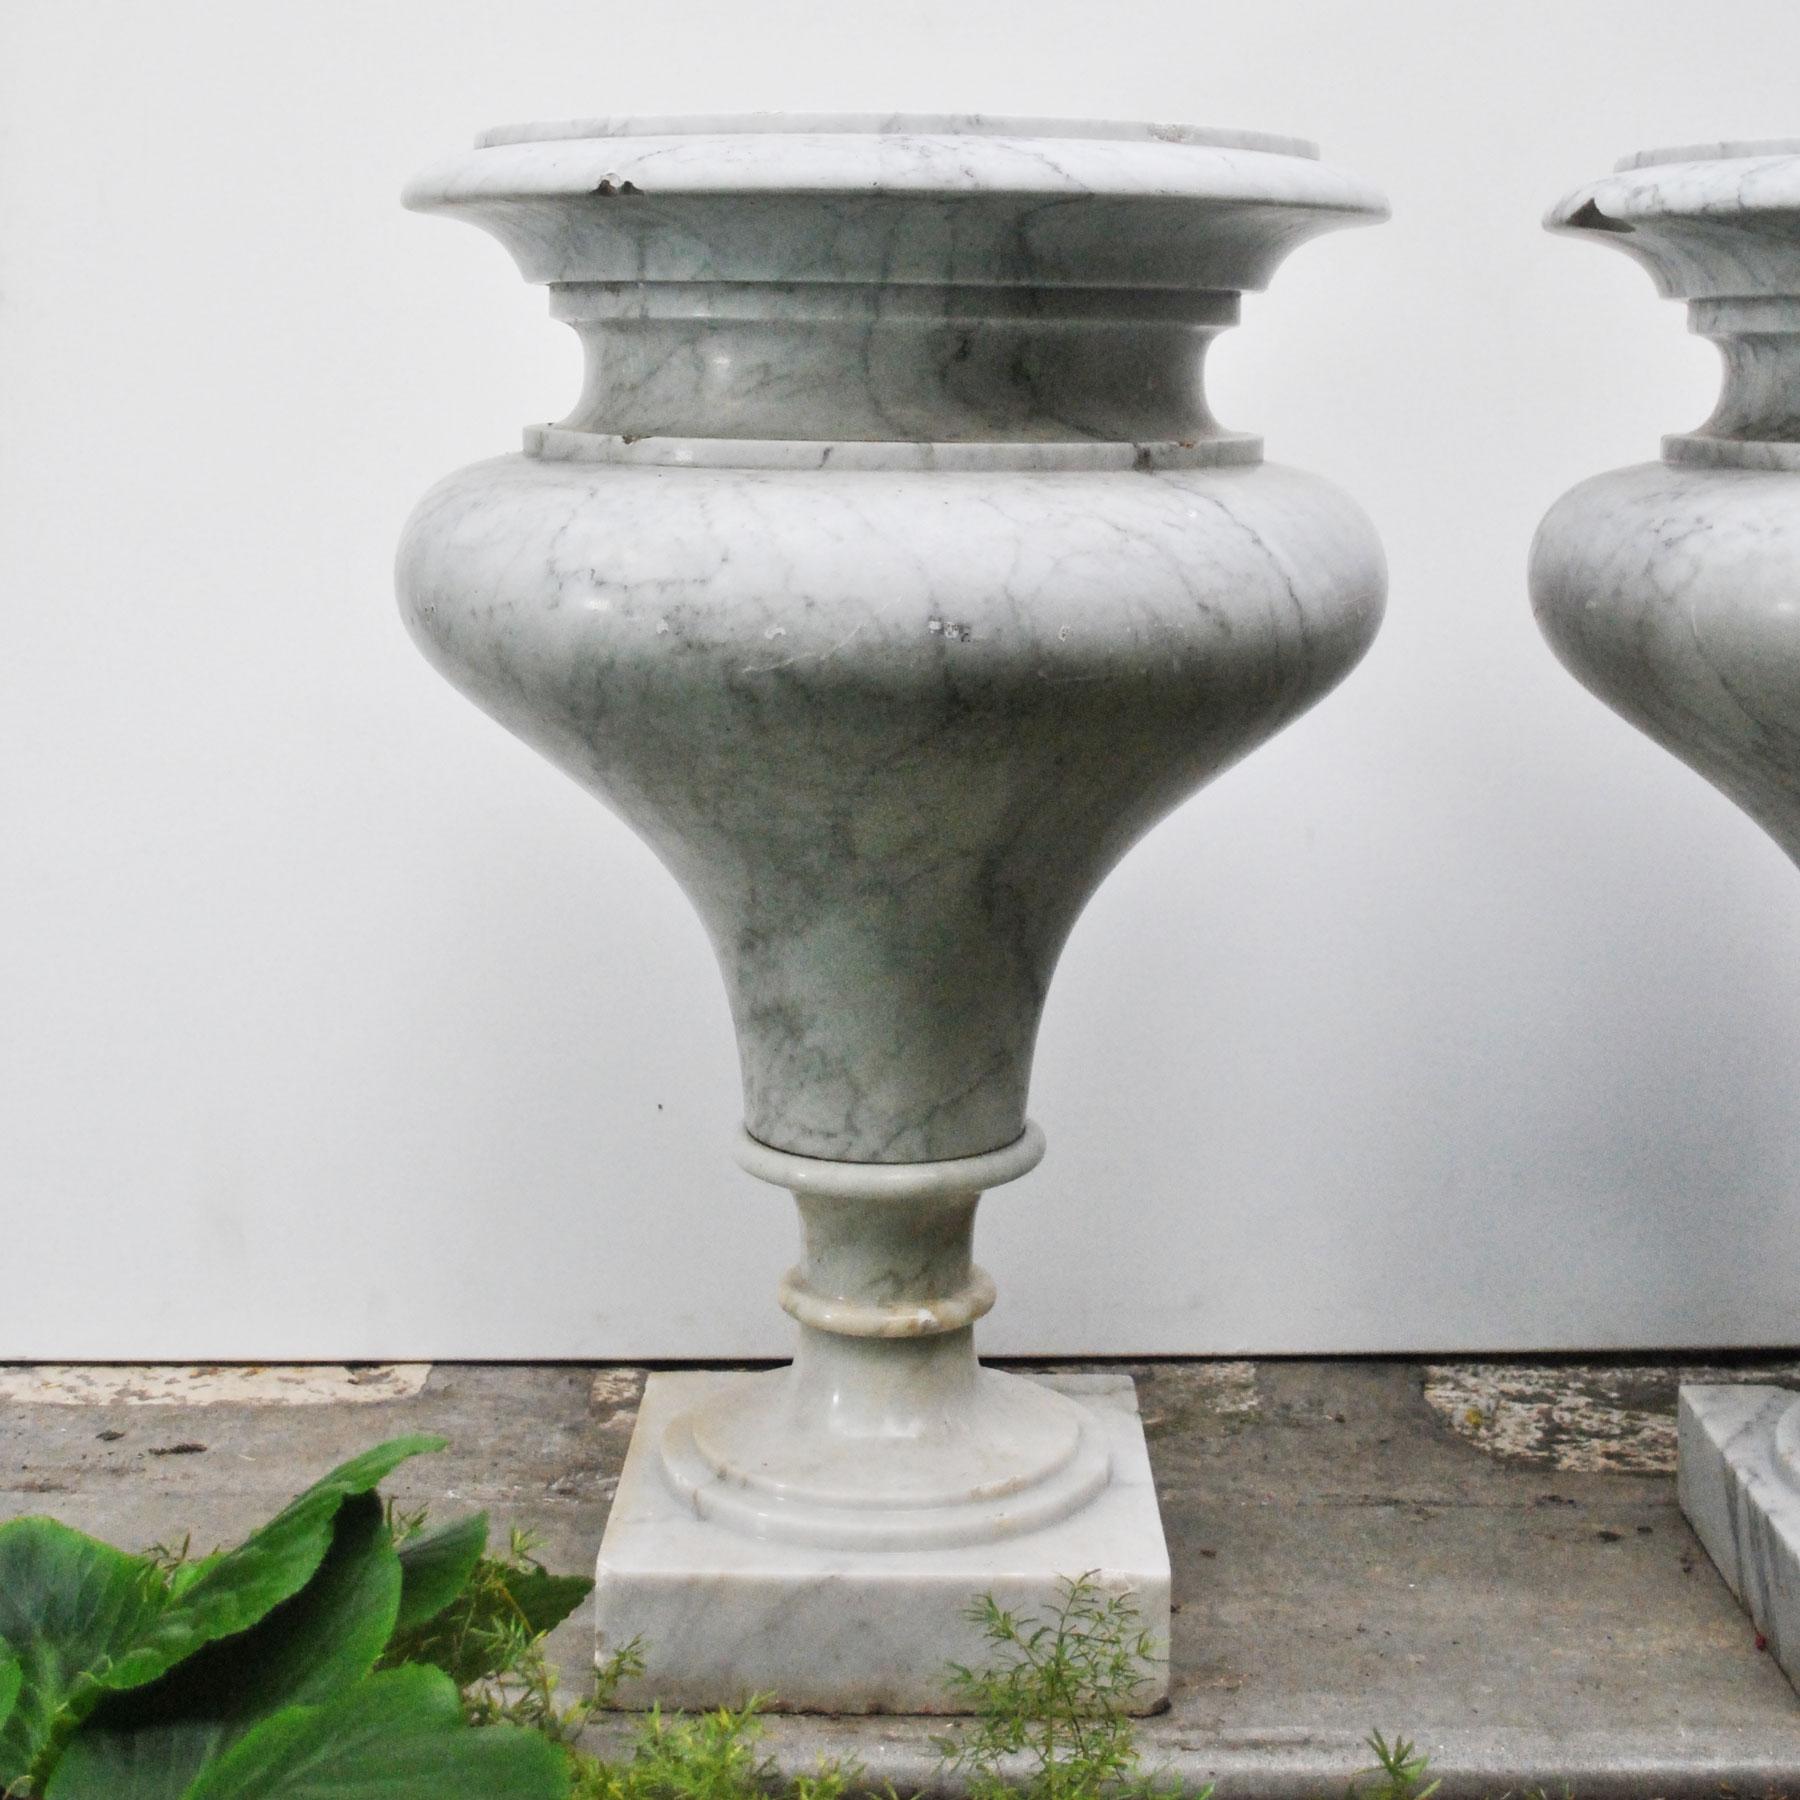 Elegant Pair of Large Carrara Marble Vases, Period Early 20th Century For Sale 6